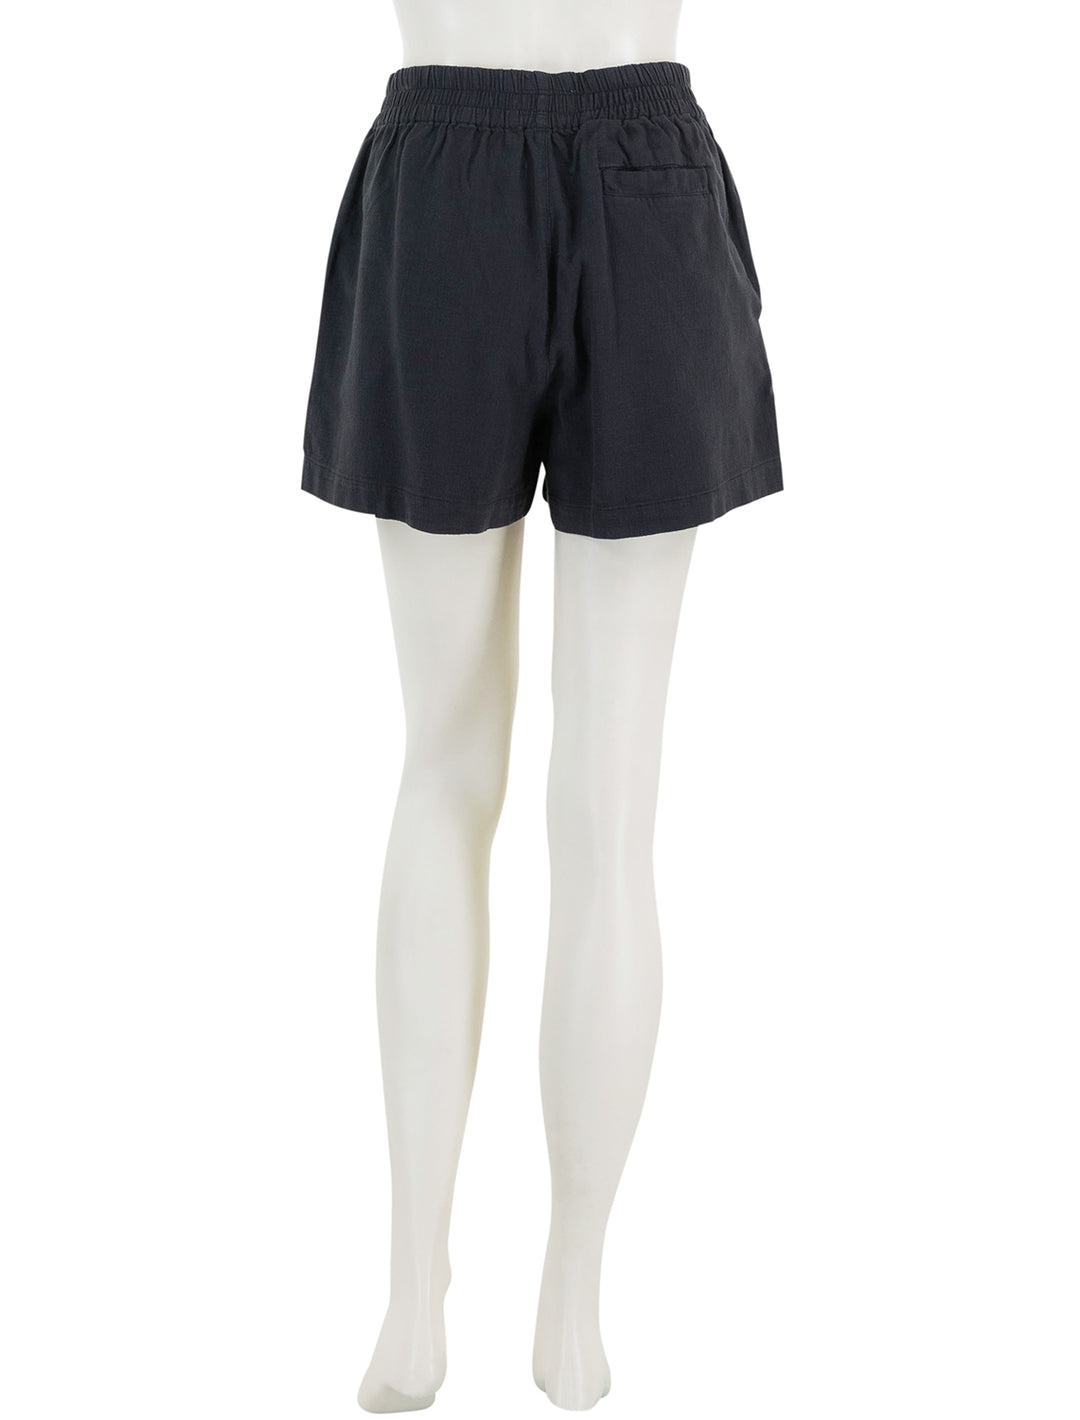 Back view of Marine Layer's elle short in black.